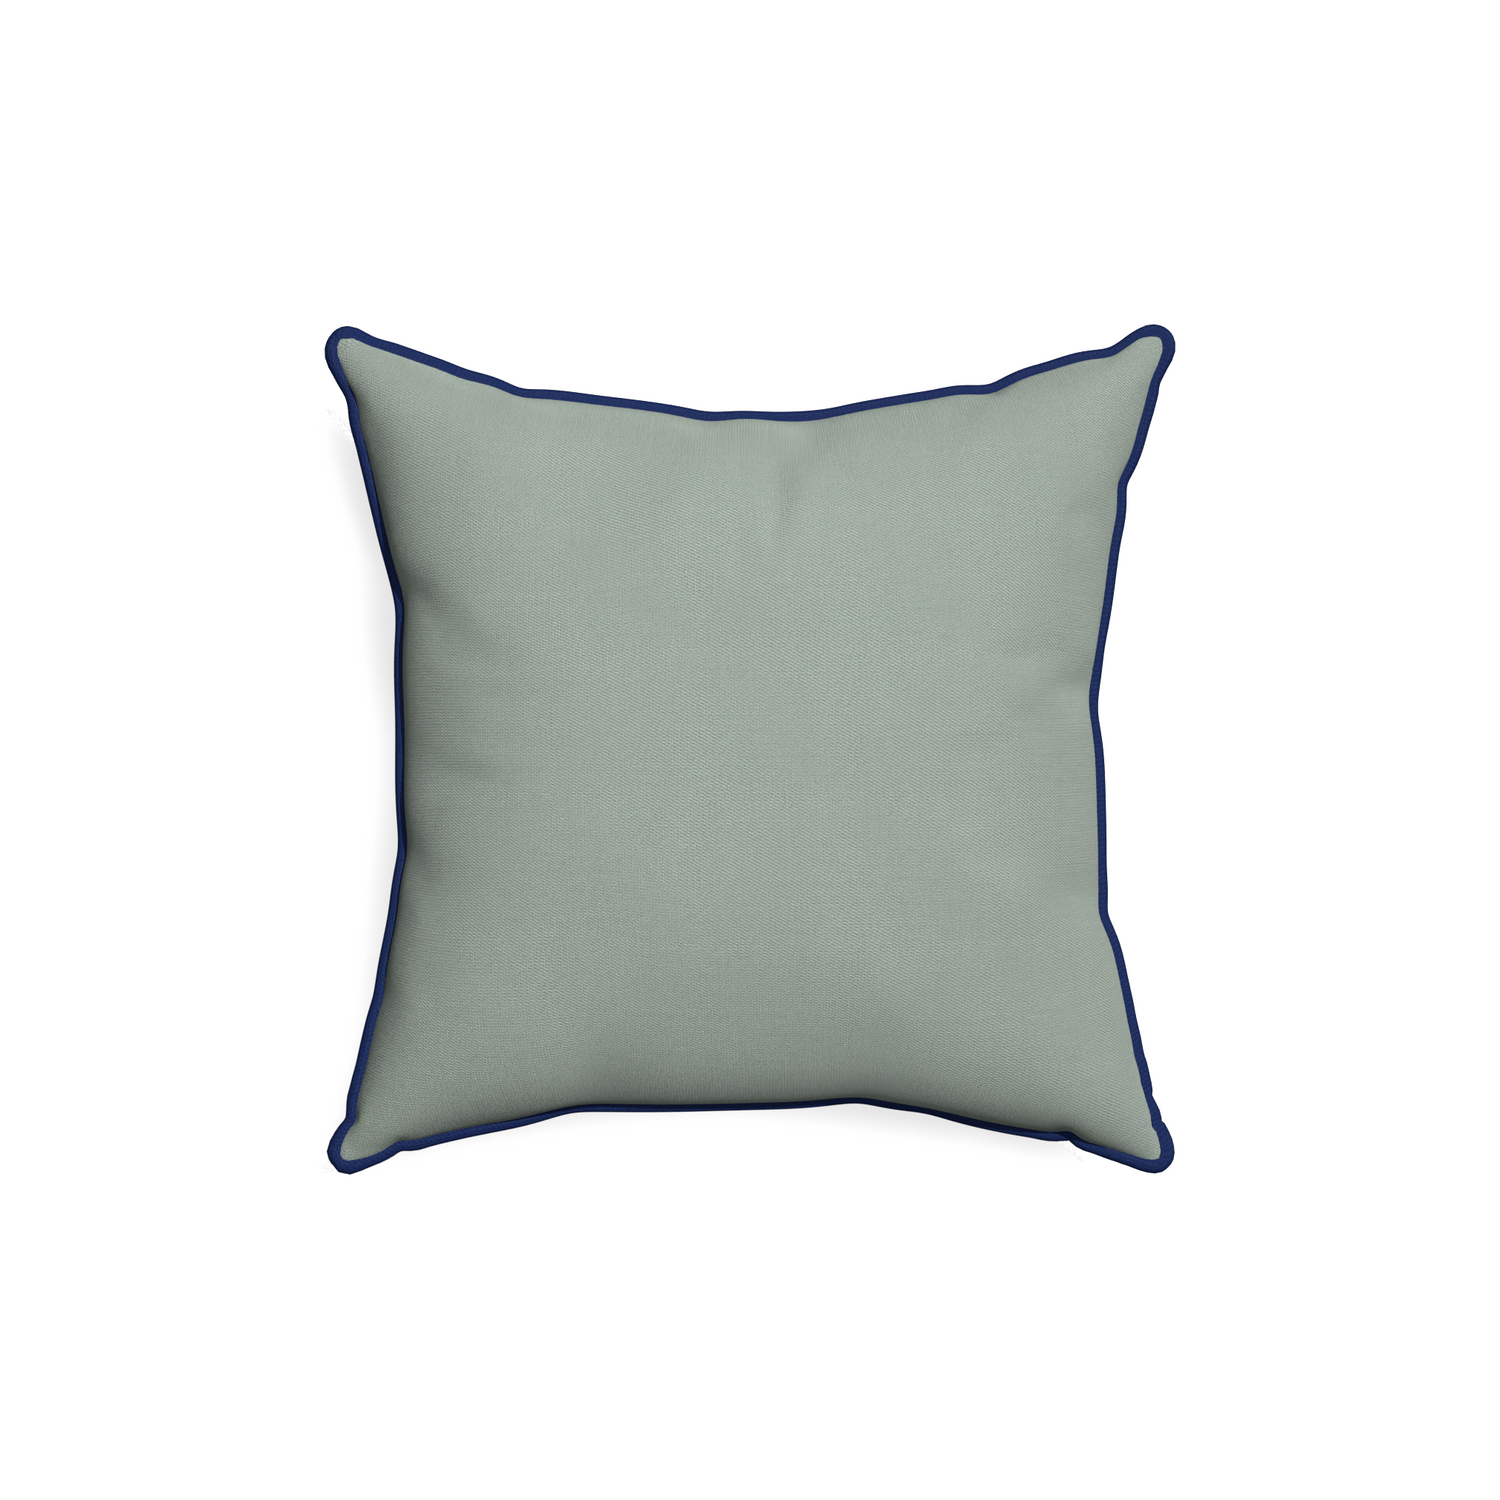 18-square sage custom sage green cottonpillow with midnight piping on white background